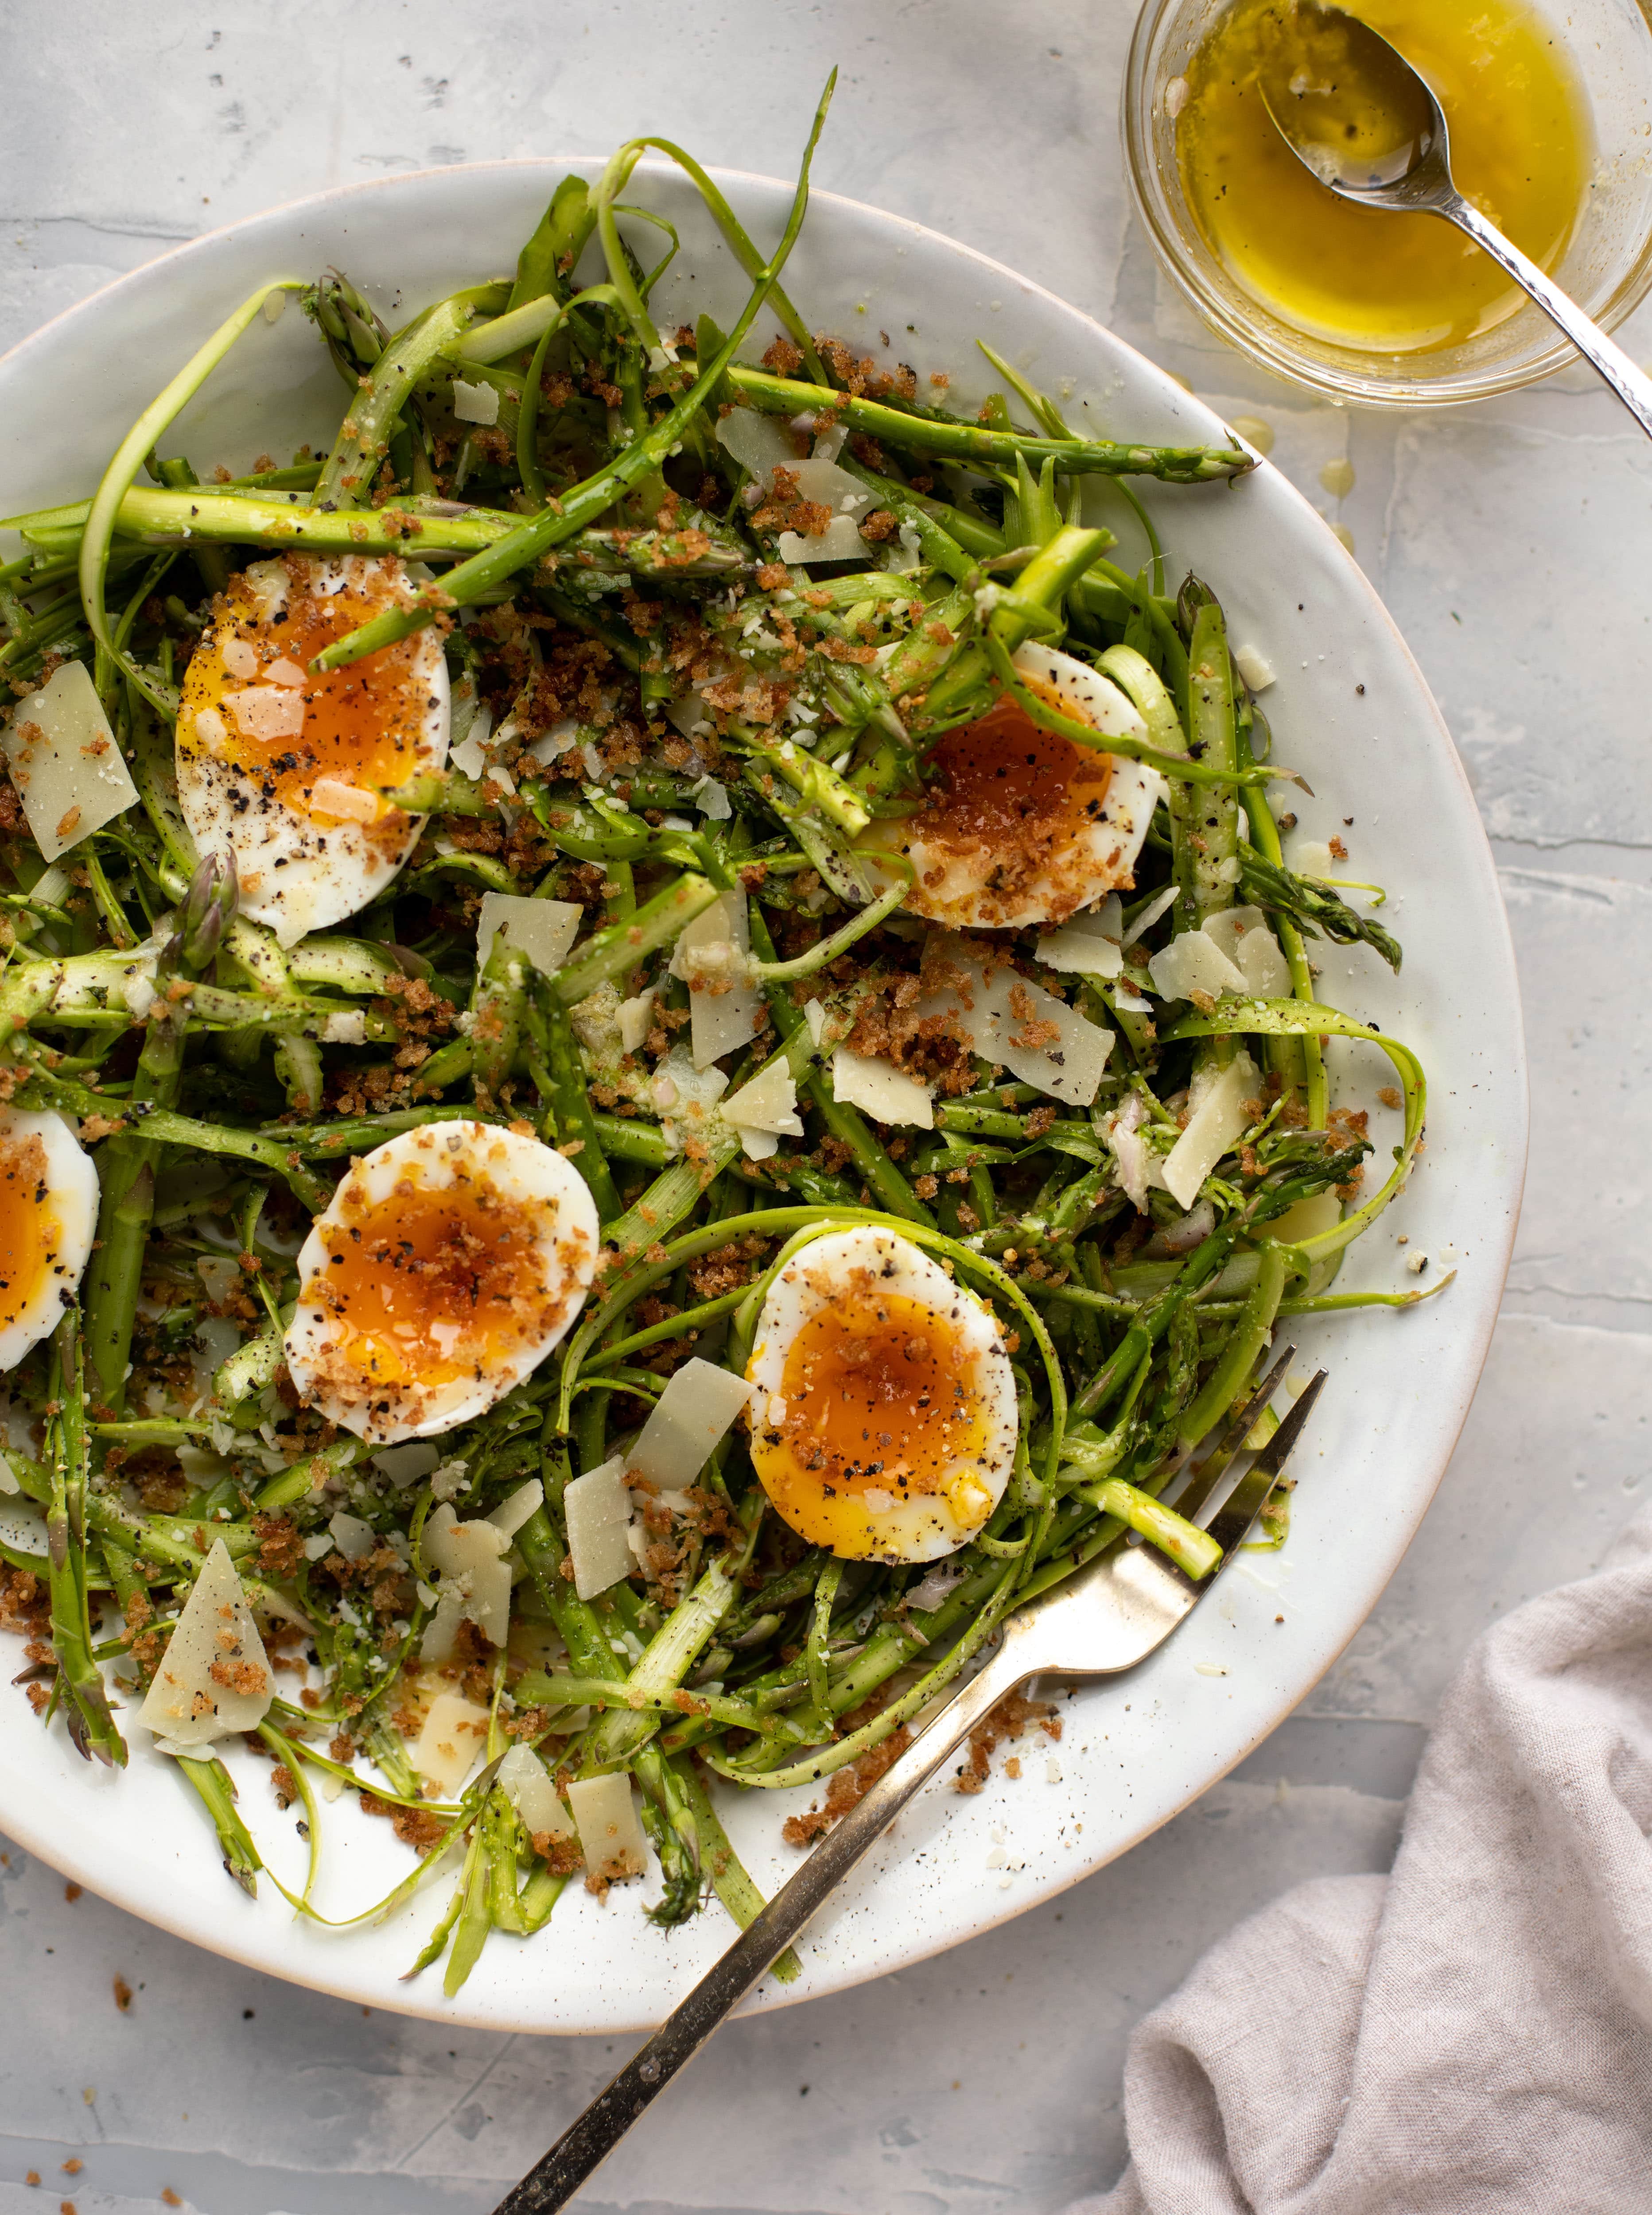 This shaved asparagus salad is tossed with a delicious parmesan vinaigrette, then topped with soft boiled eggs and finished with crunchy garlic breadcrumbs!